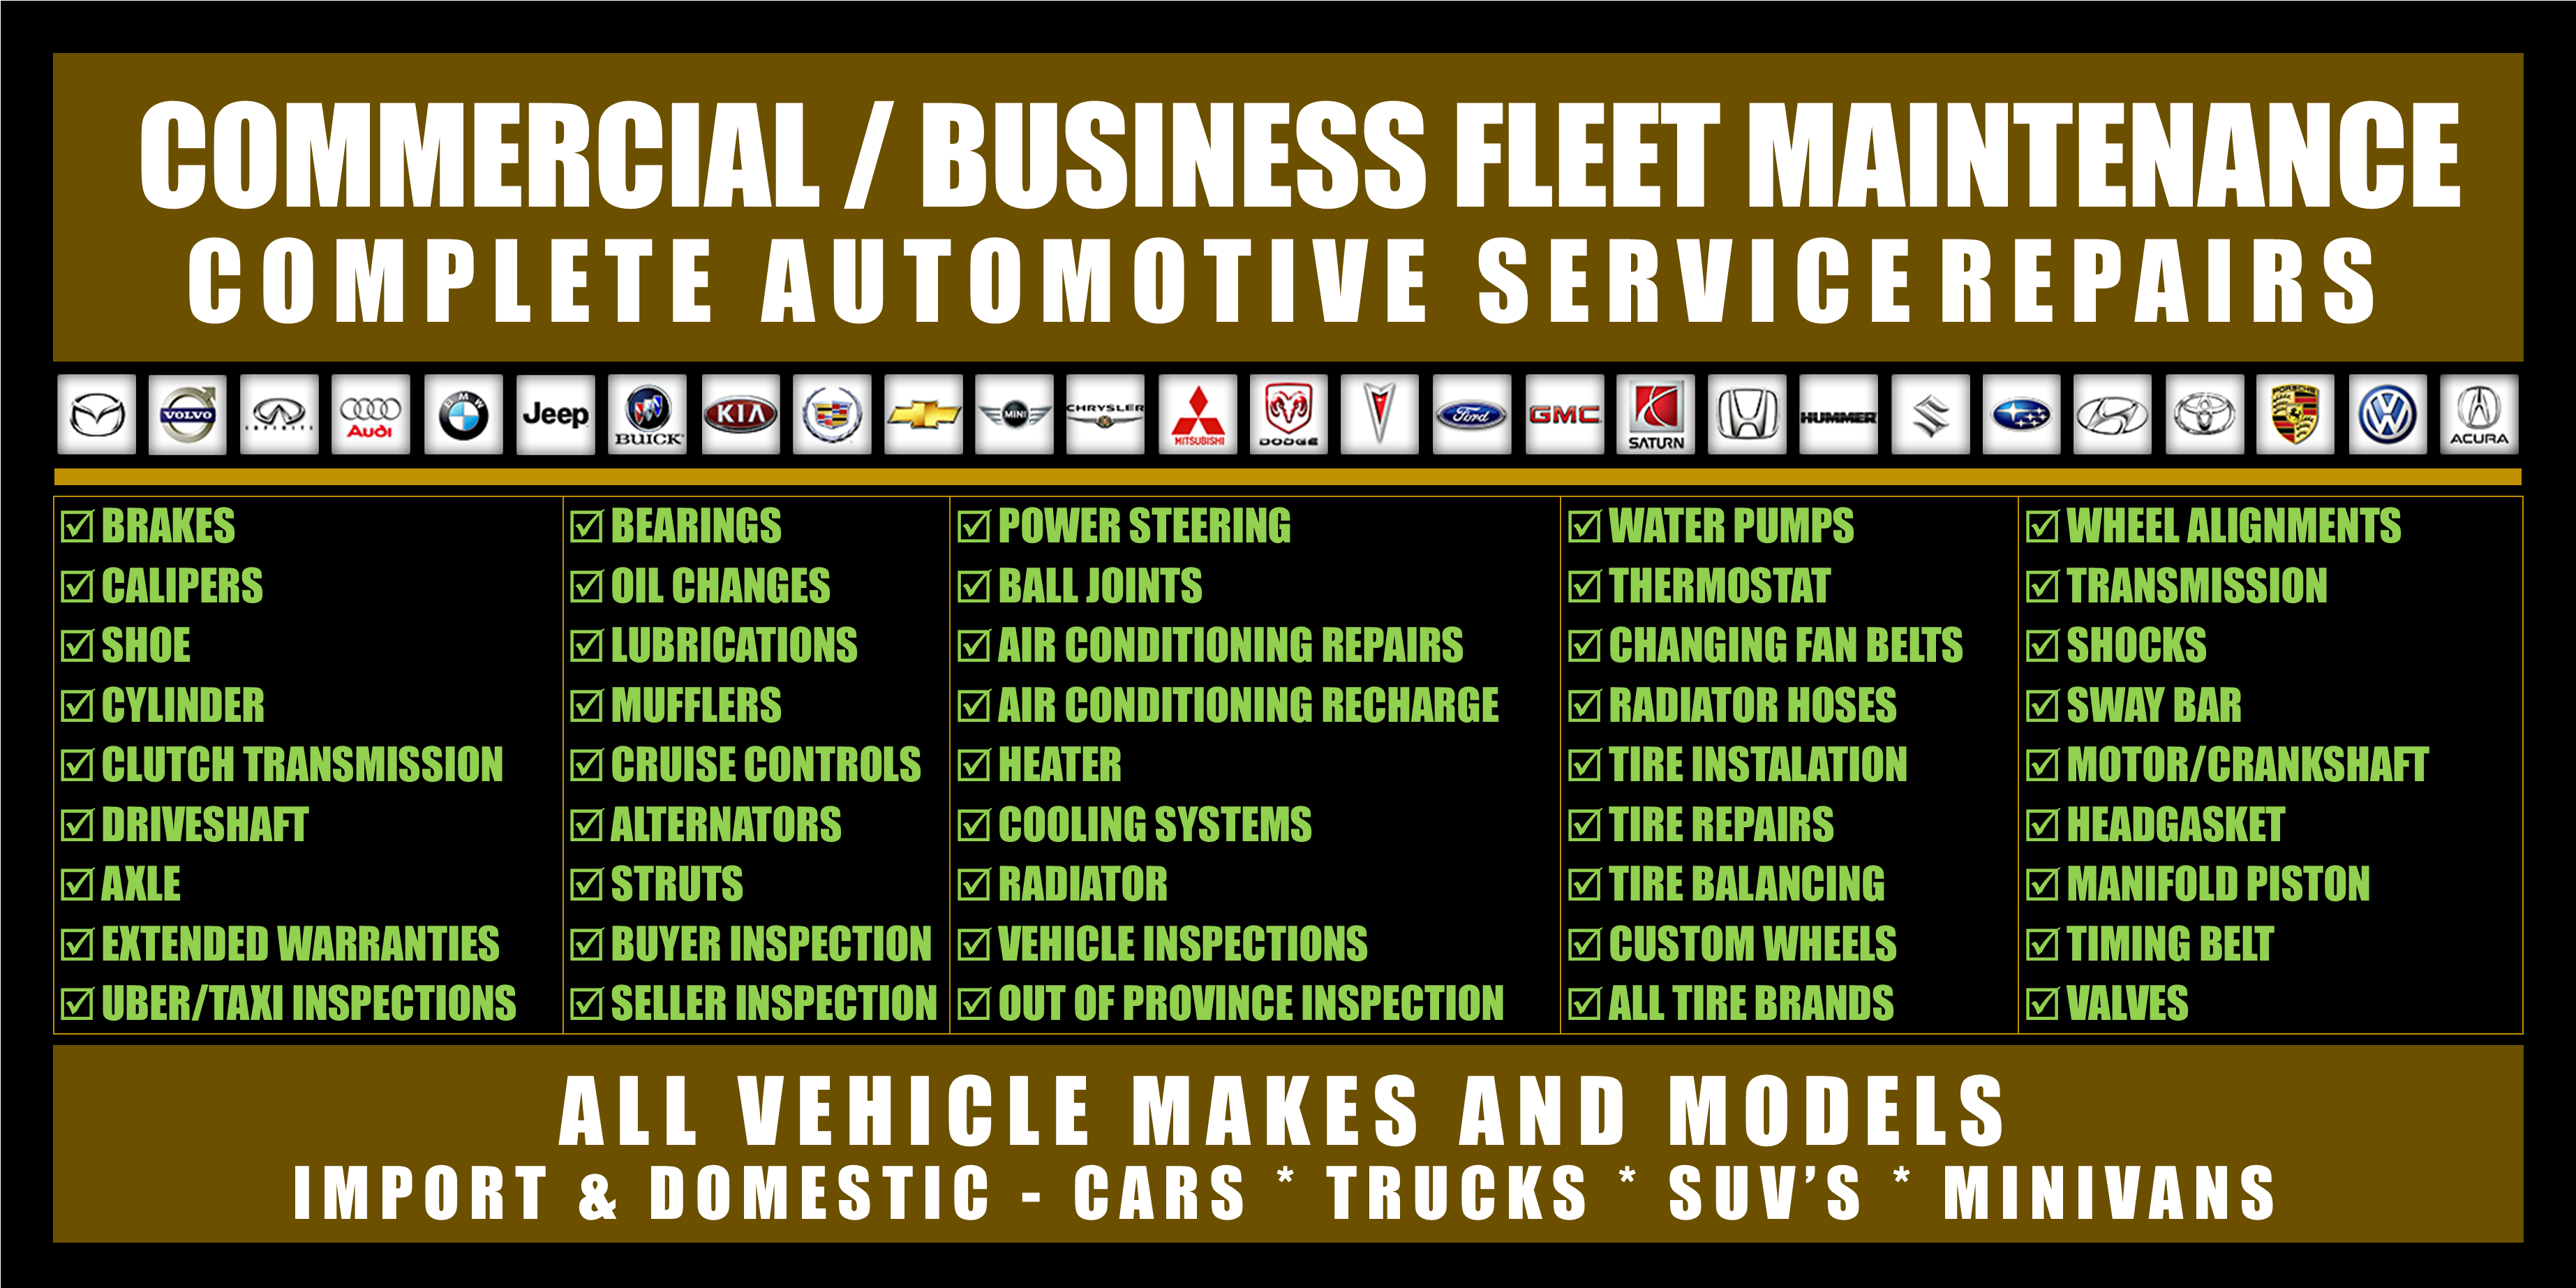 Commercial/Business Fleet Maintenance and Complete Automotive Service Repairs available to all